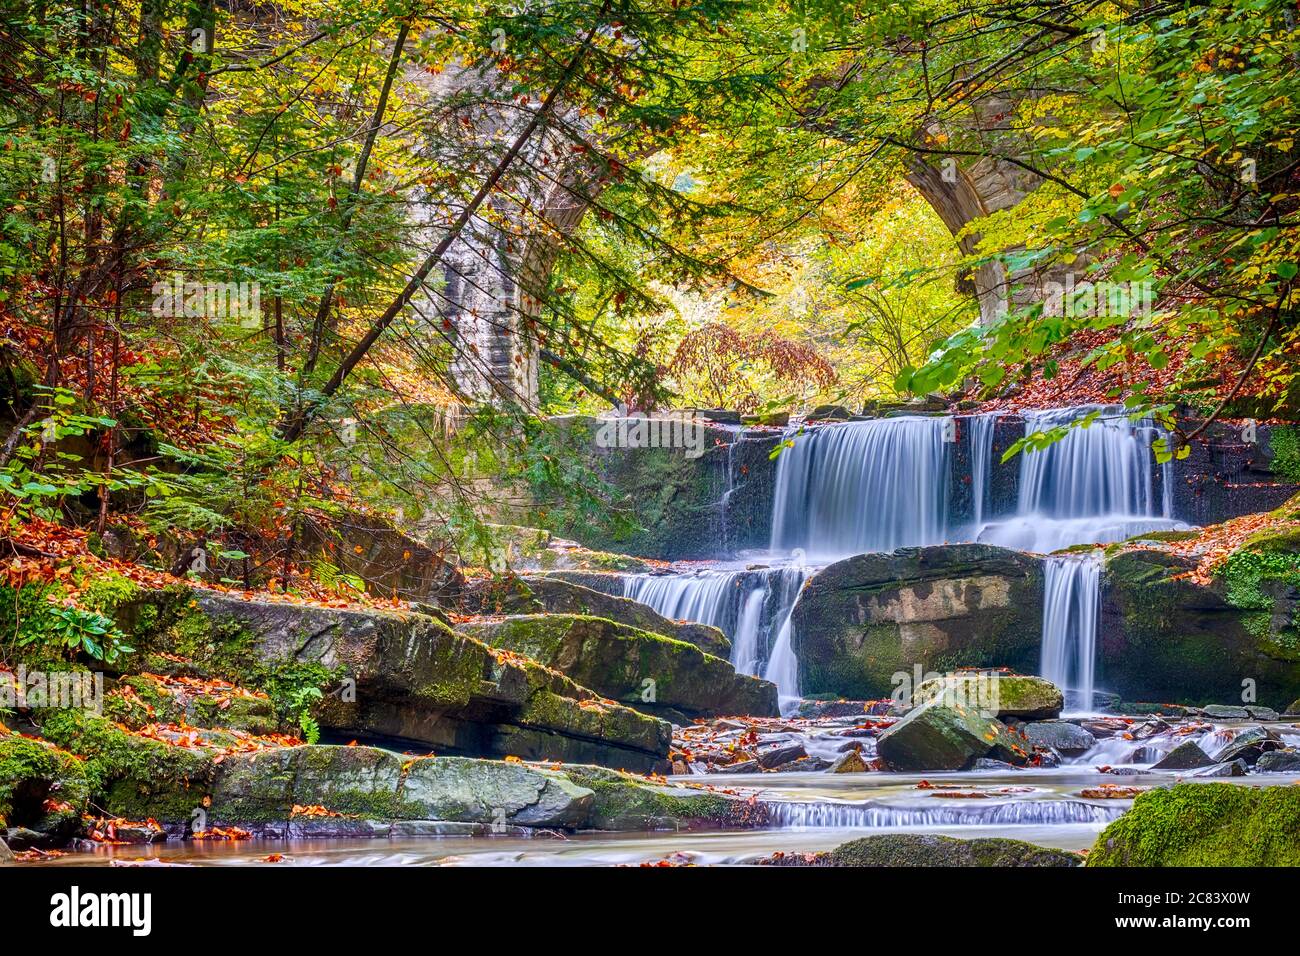 Sunny forest and autumn day. Small river and several natural rapids of a waterfall Stock Photo